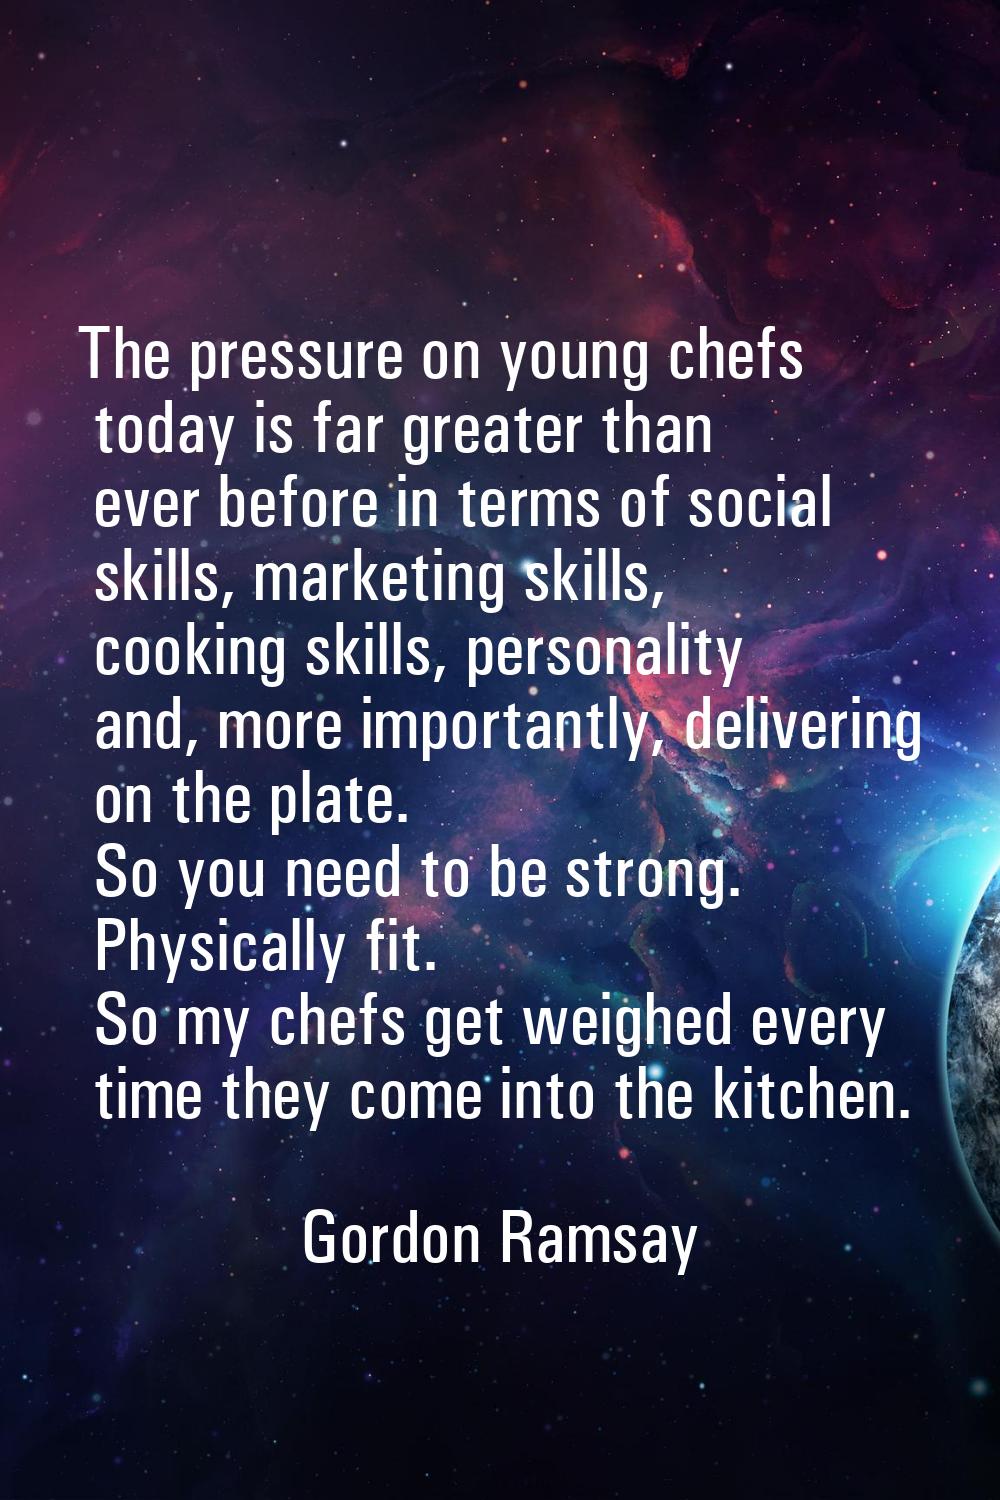 The pressure on young chefs today is far greater than ever before in terms of social skills, market